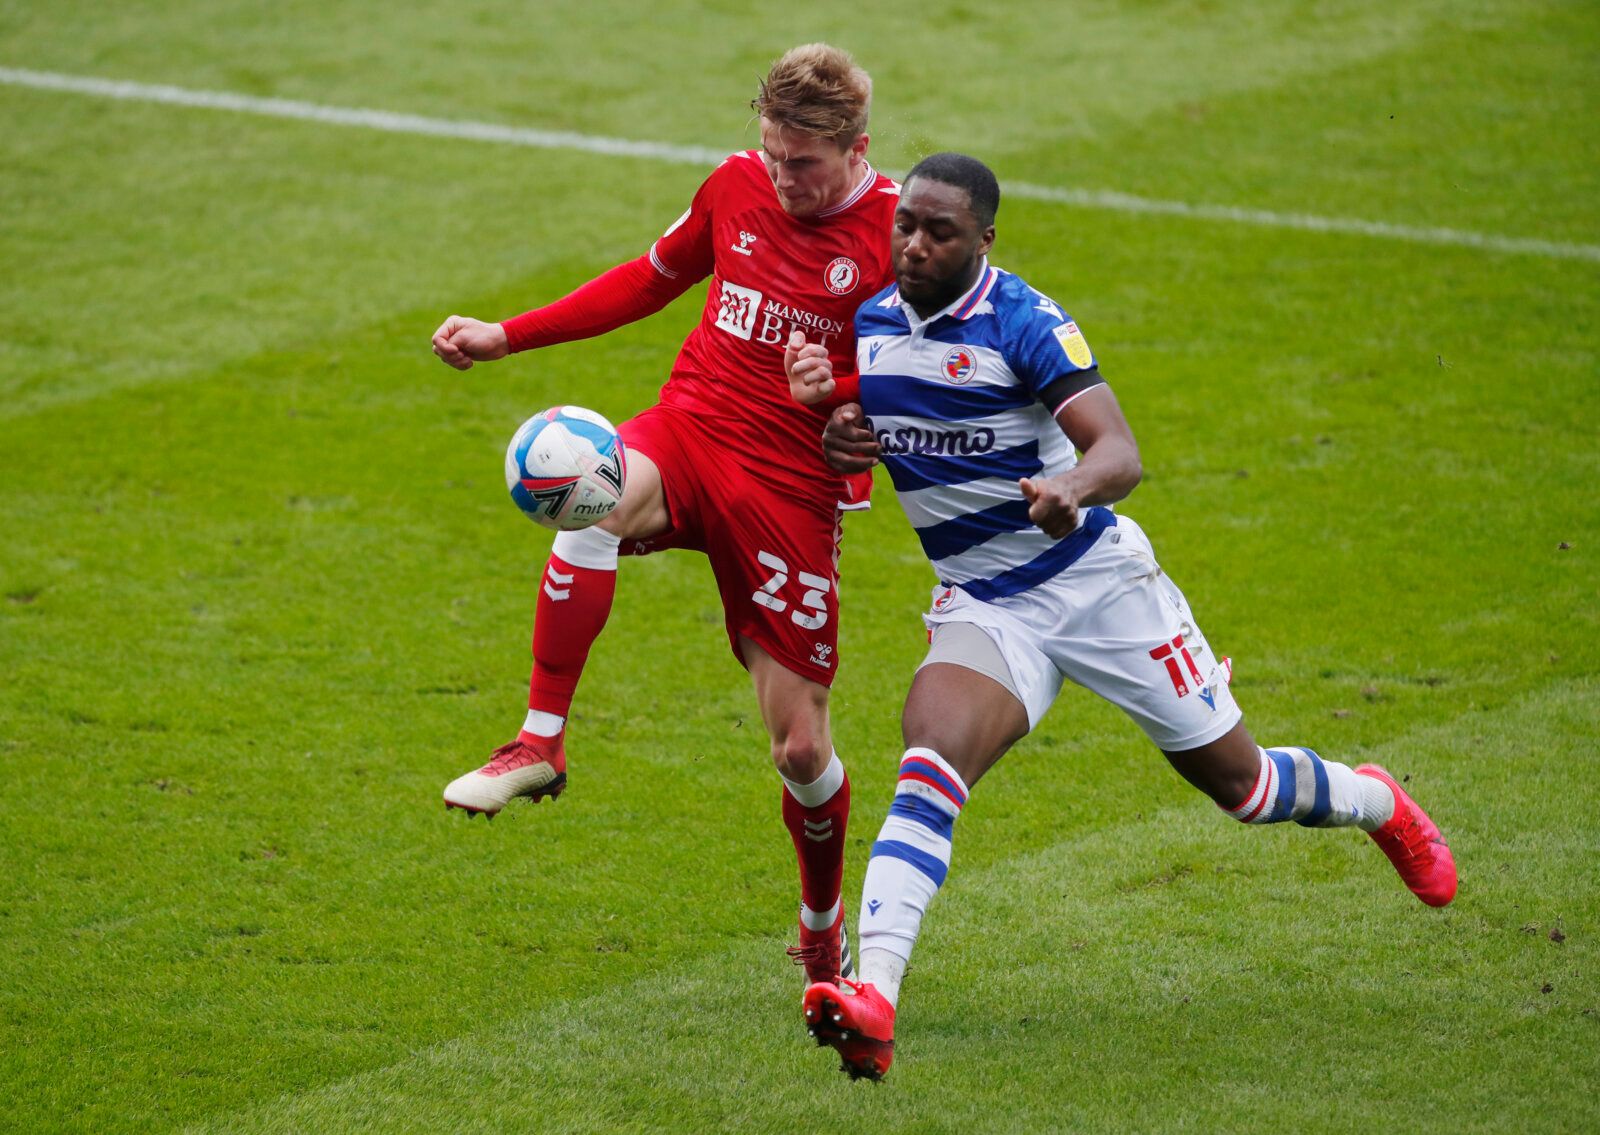 Soccer Football - Championship - Reading v Bristol City - Madejski Stadium, Reading, Britain - November 28, 2020 Reading's Yakou Meite in action with Bristol City's Taylor Moore Action Images/Andrew Couldridge EDITORIAL USE ONLY. No use with unauthorized audio, video, data, fixture lists, club/league logos or 'live' services. Online in-match use limited to 75 images, no video emulation. No use in betting, games or single club /league/player publications.  Please contact your account representati